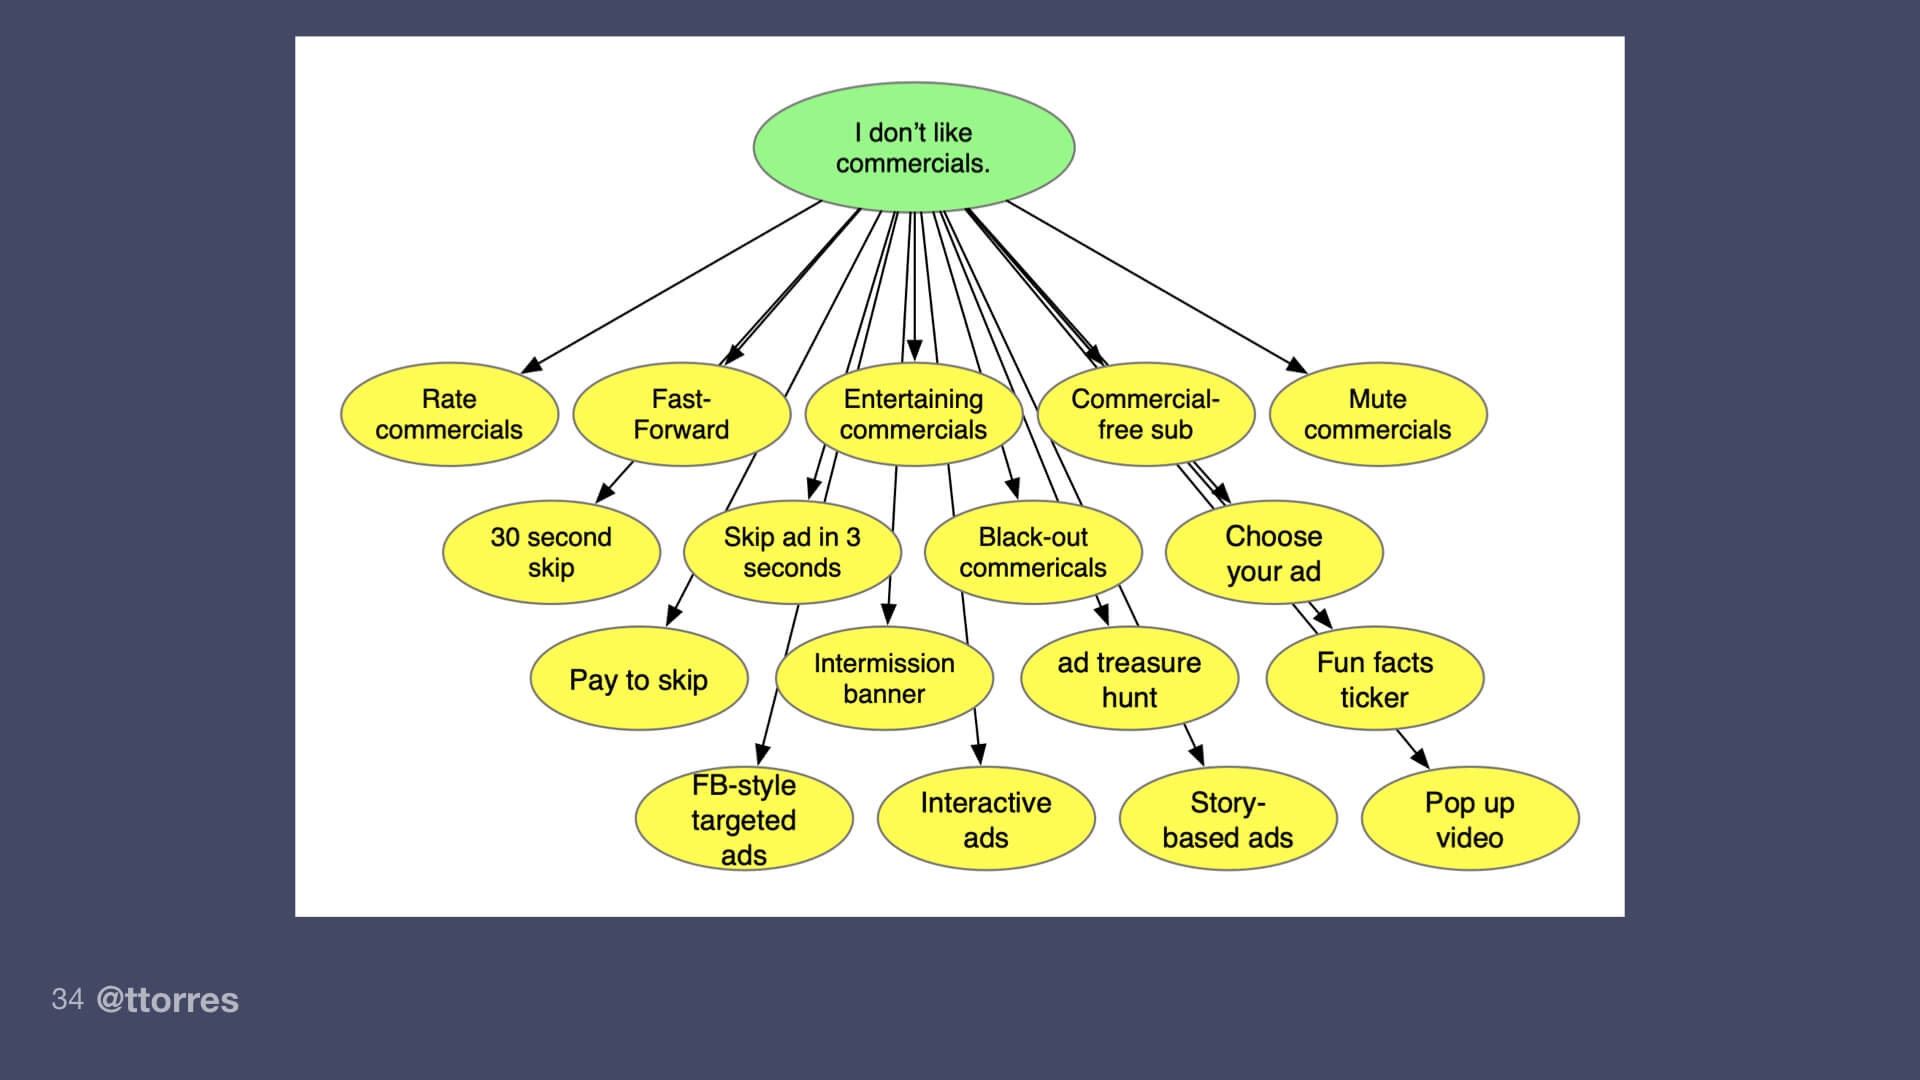 A segment of an opportunity solution tree showing one opportunity with many different solutions branching off of it.